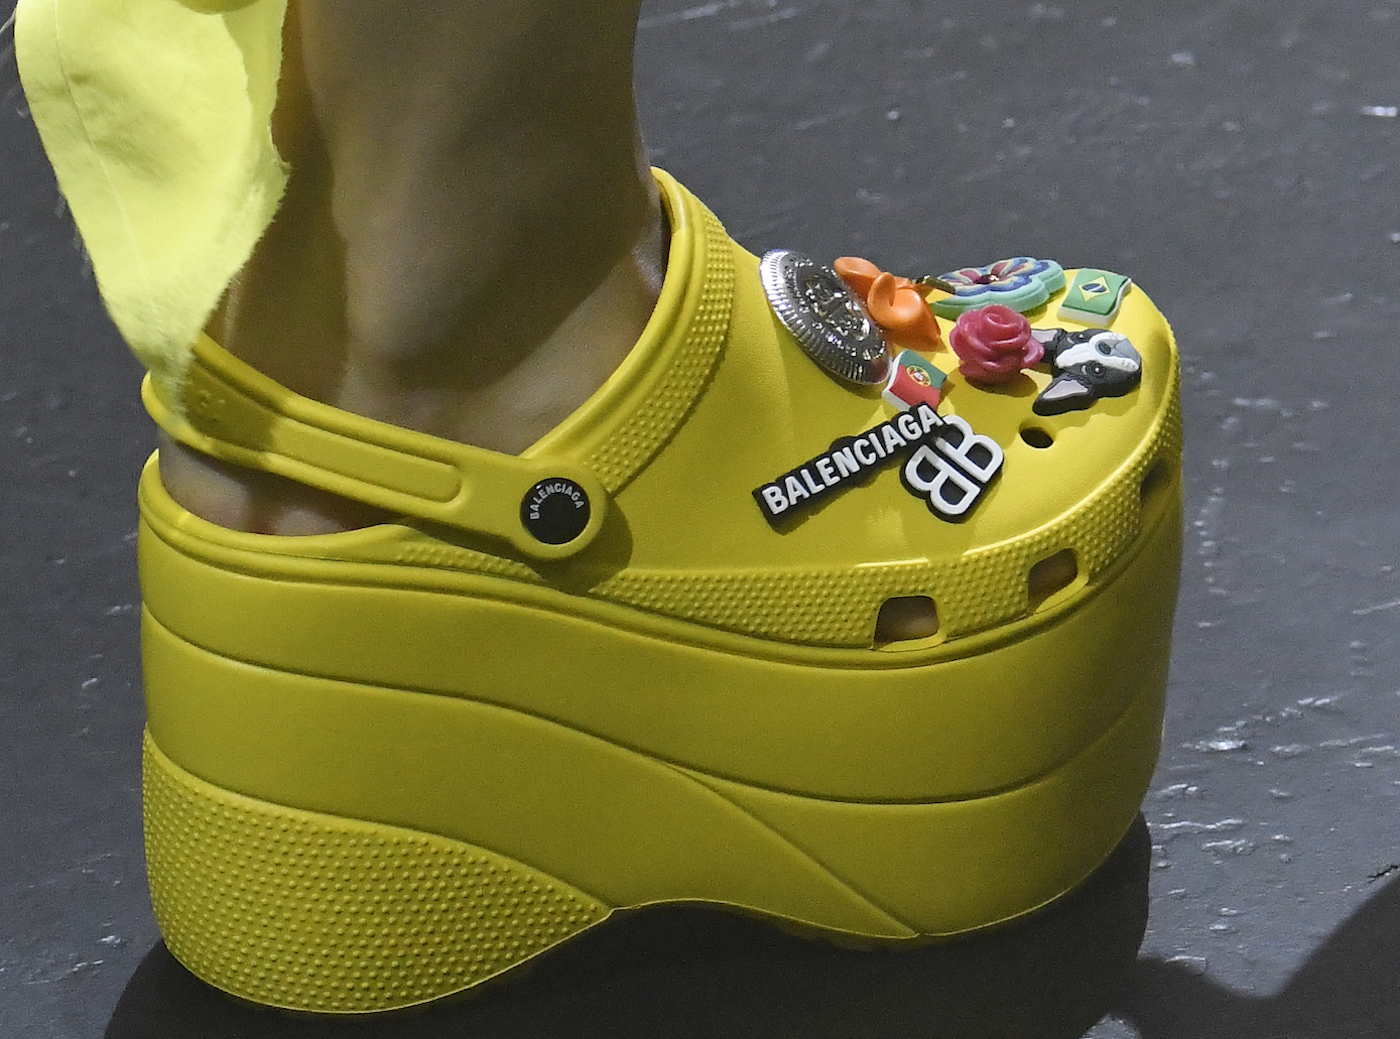 the most iconic fugly shoe hybrids in fashion history - i-D